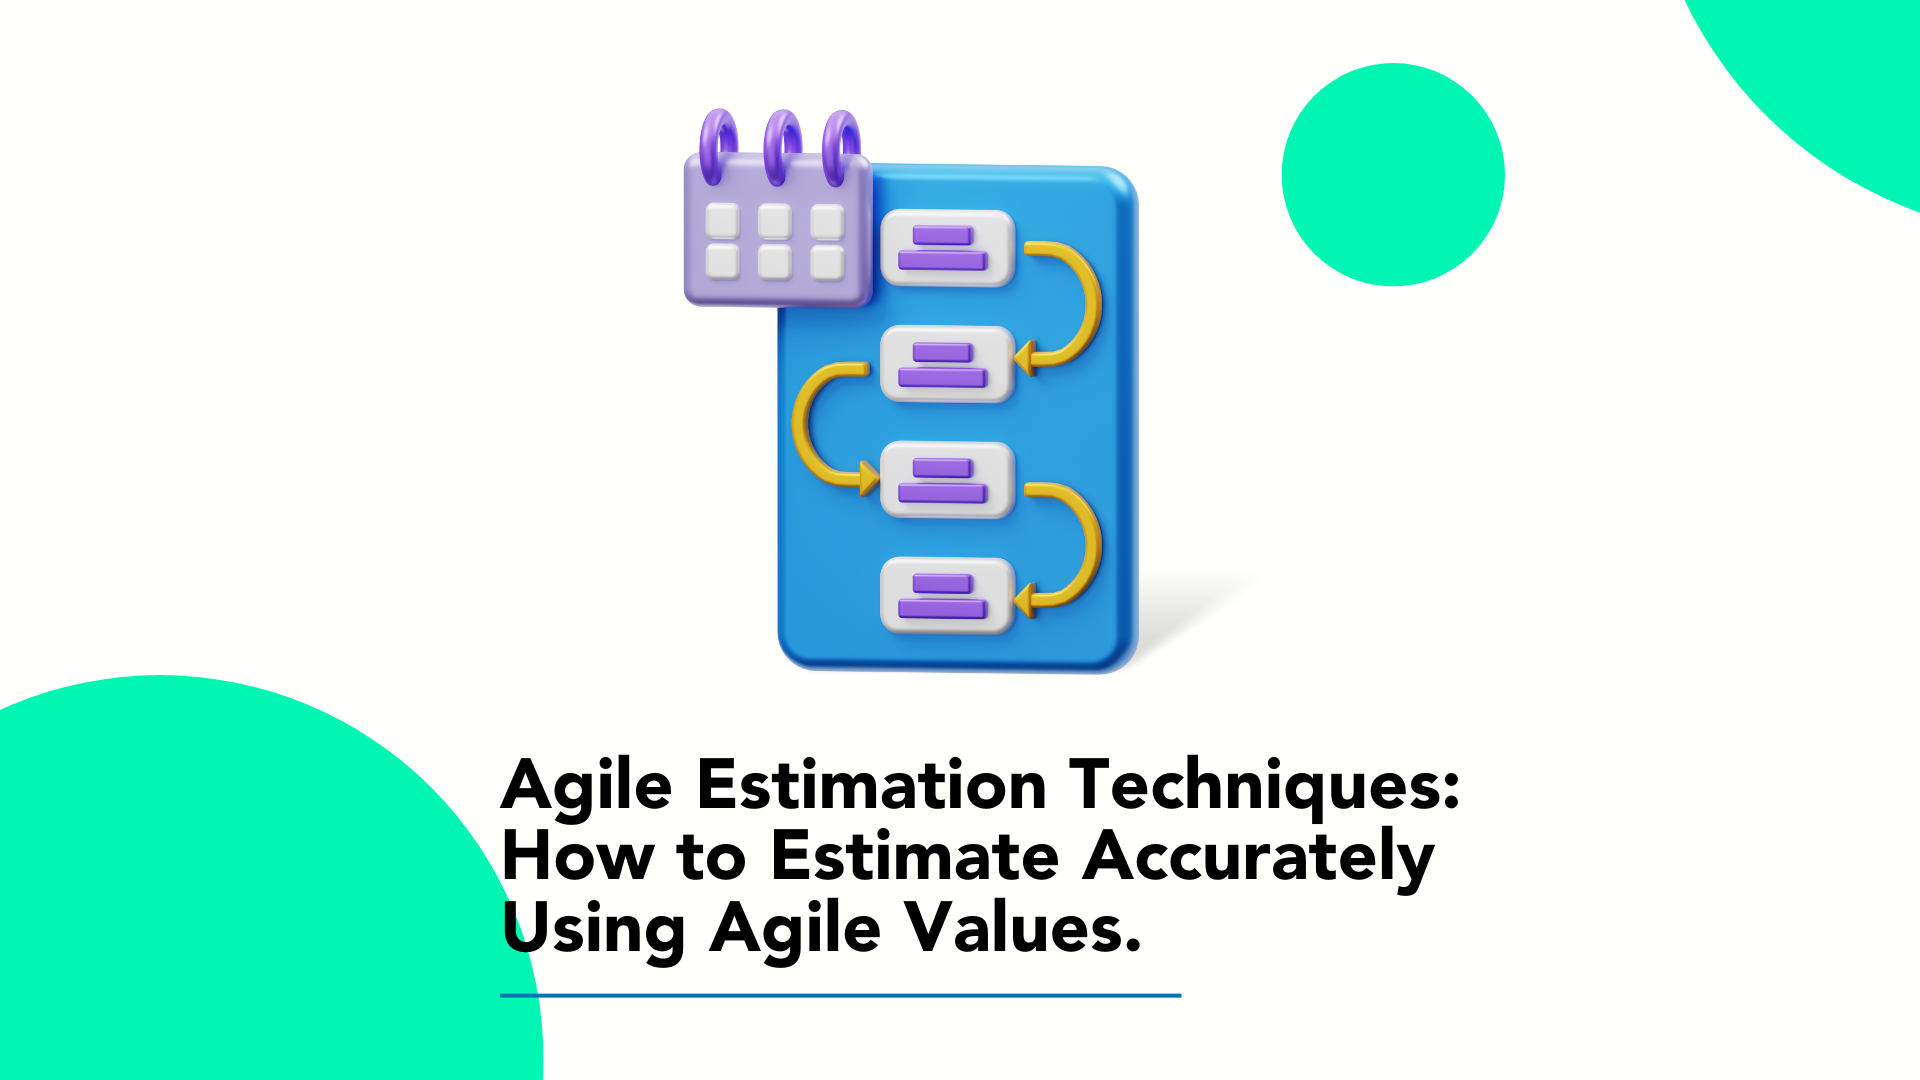 Featured Image of Prakya for the blog article "Agile Estimation Techniques: How to Estimate Accurately Using Agile Values"